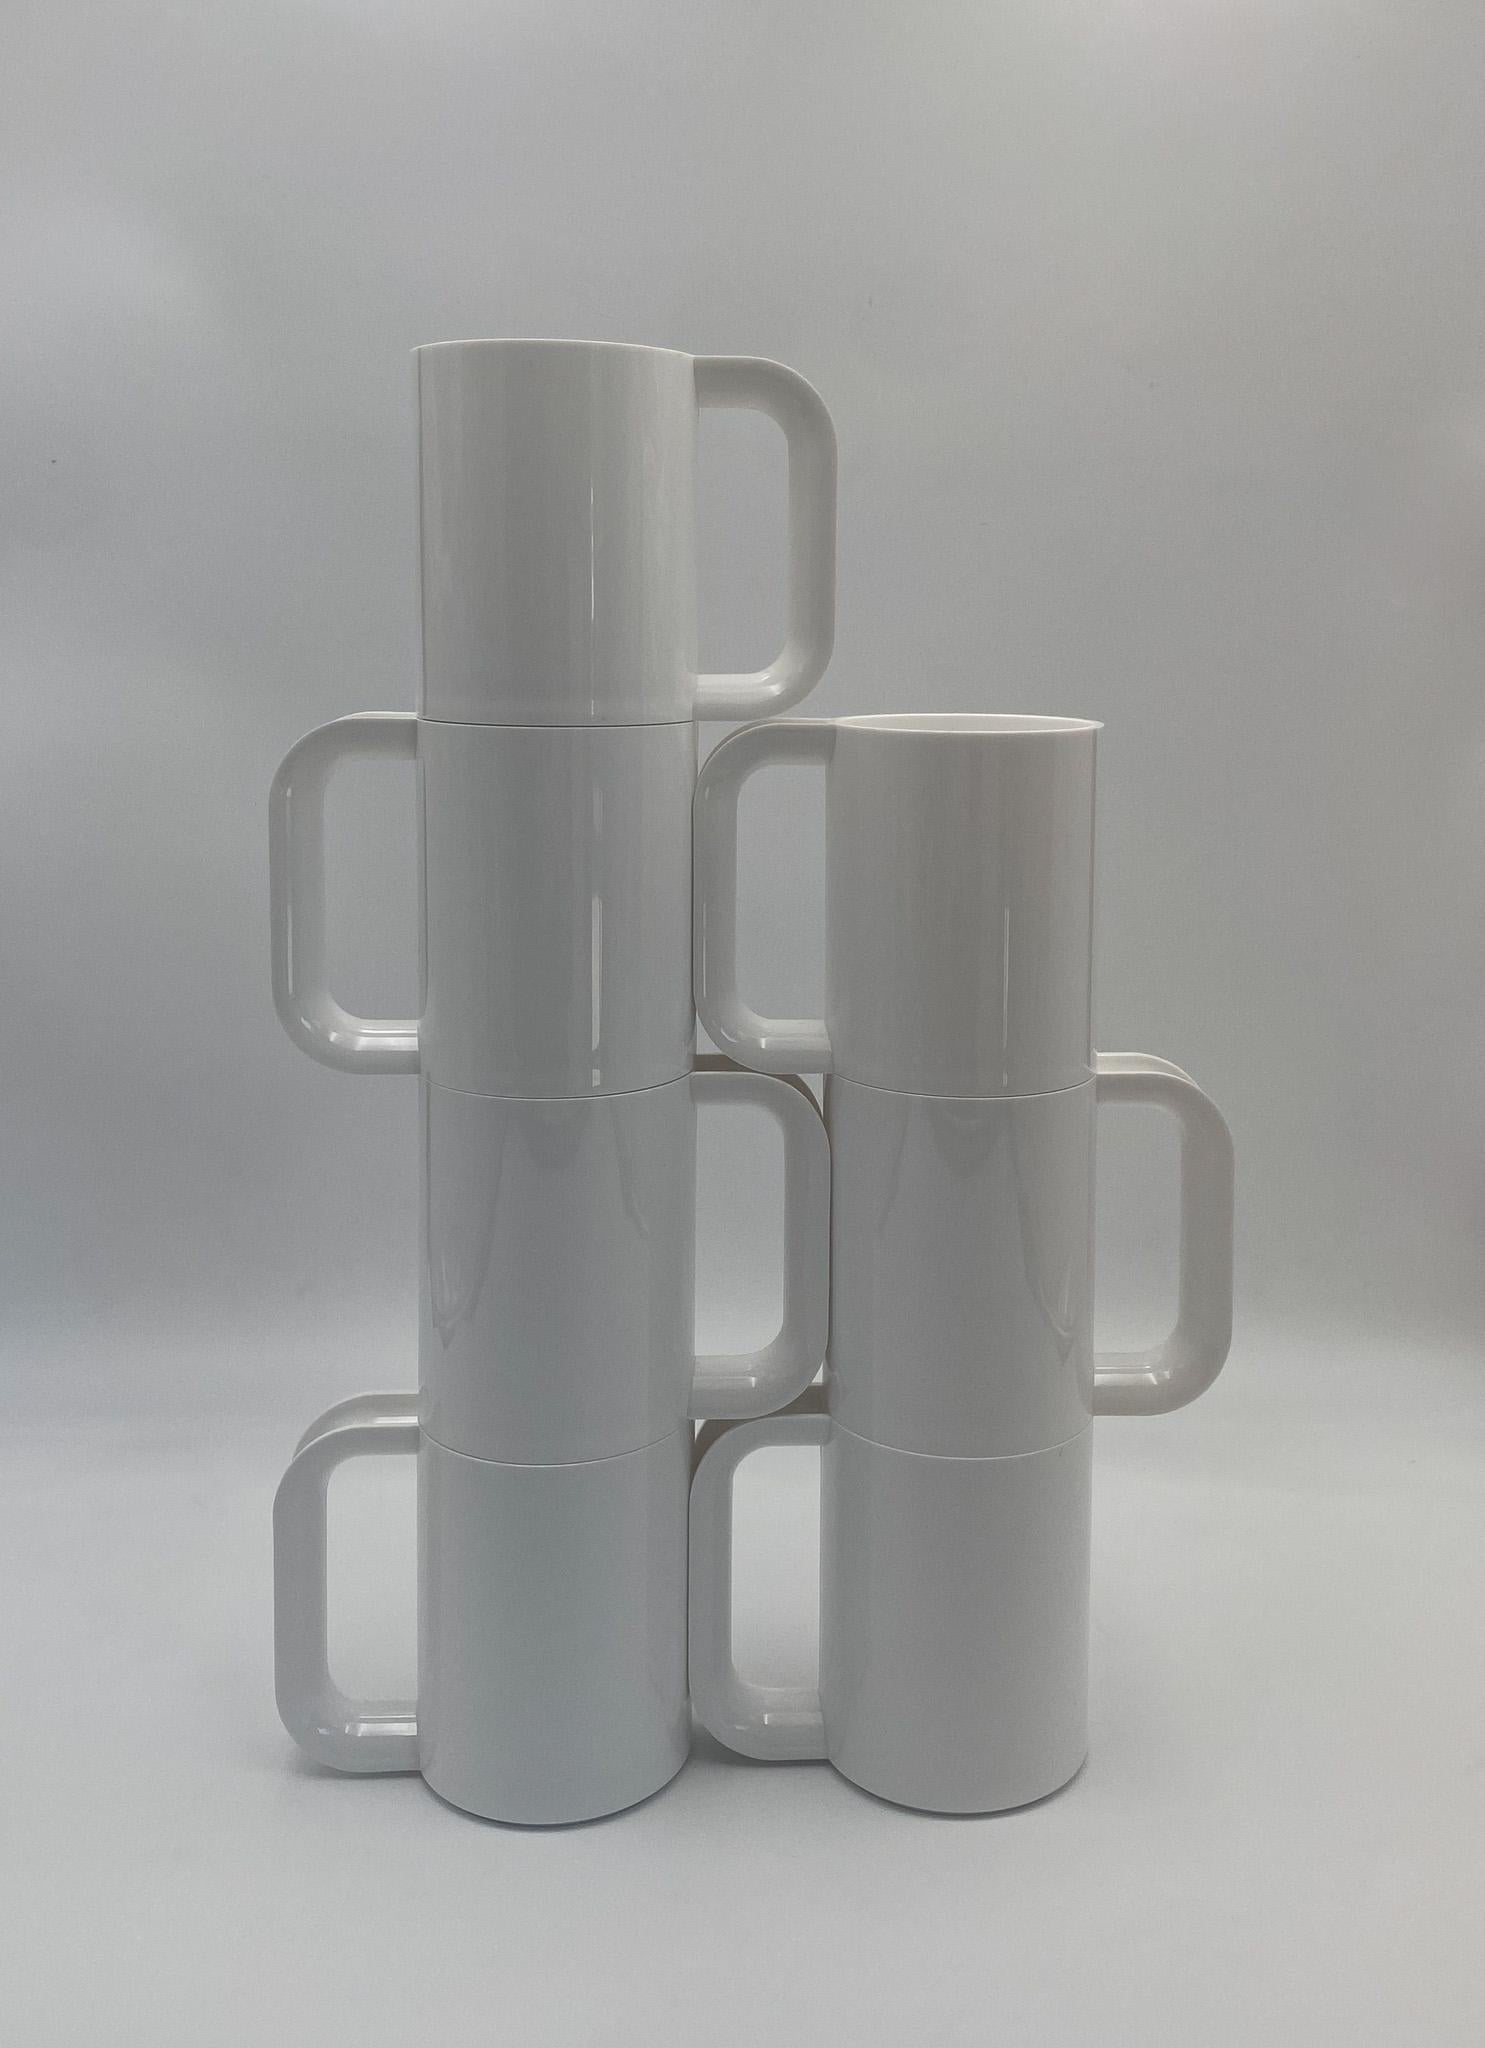 Mid-Century Modern Massimo Vignelli Stackable Dinnerware for Heller ( 33 pieces ), USA, c.1980